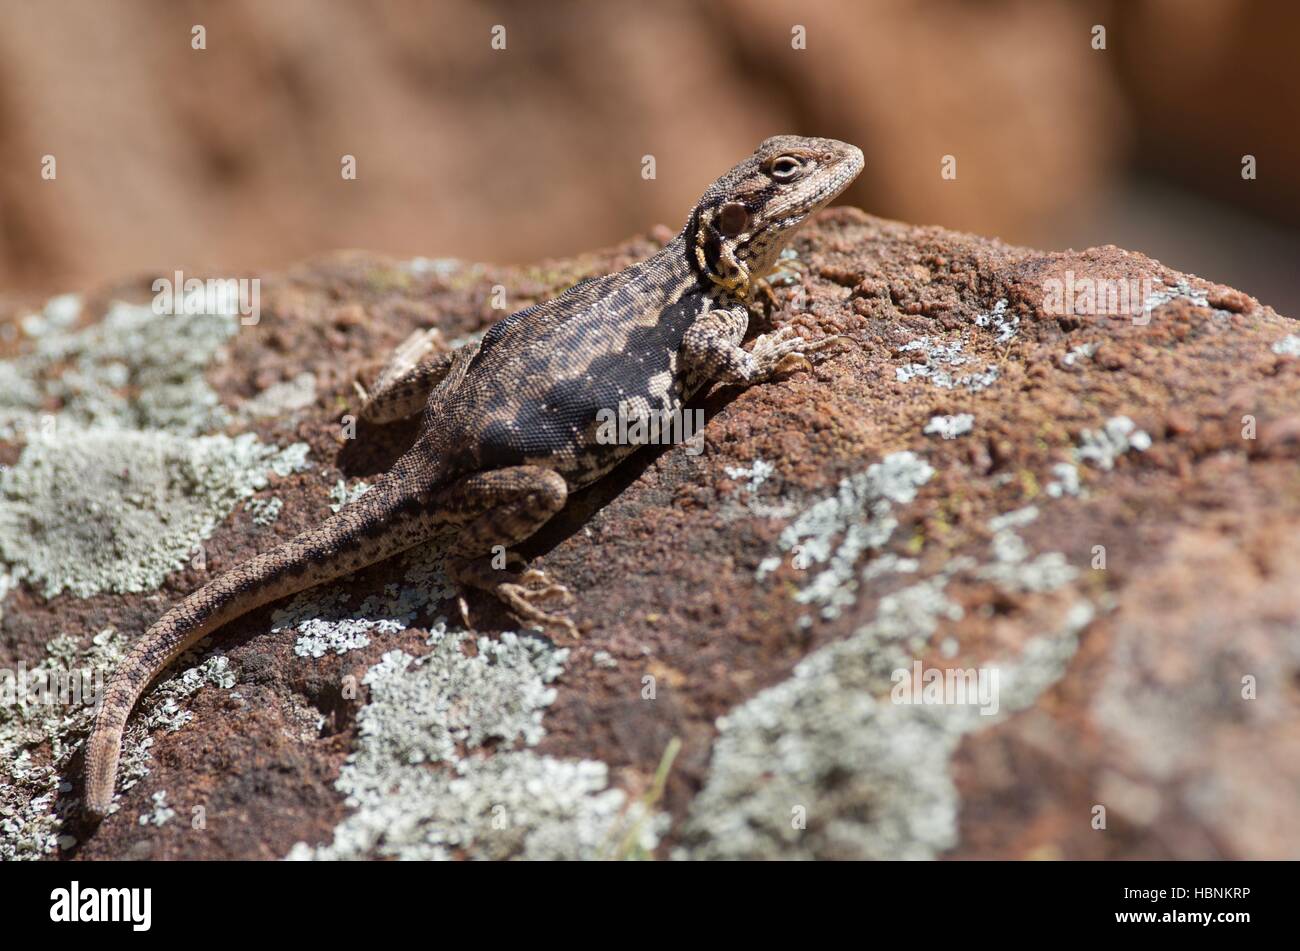 A gravid female Tawny Dragon (Ctenophorus decresii) basking on a boulder in Telowie Gorge Conservation Park, South Australia. Stock Photo